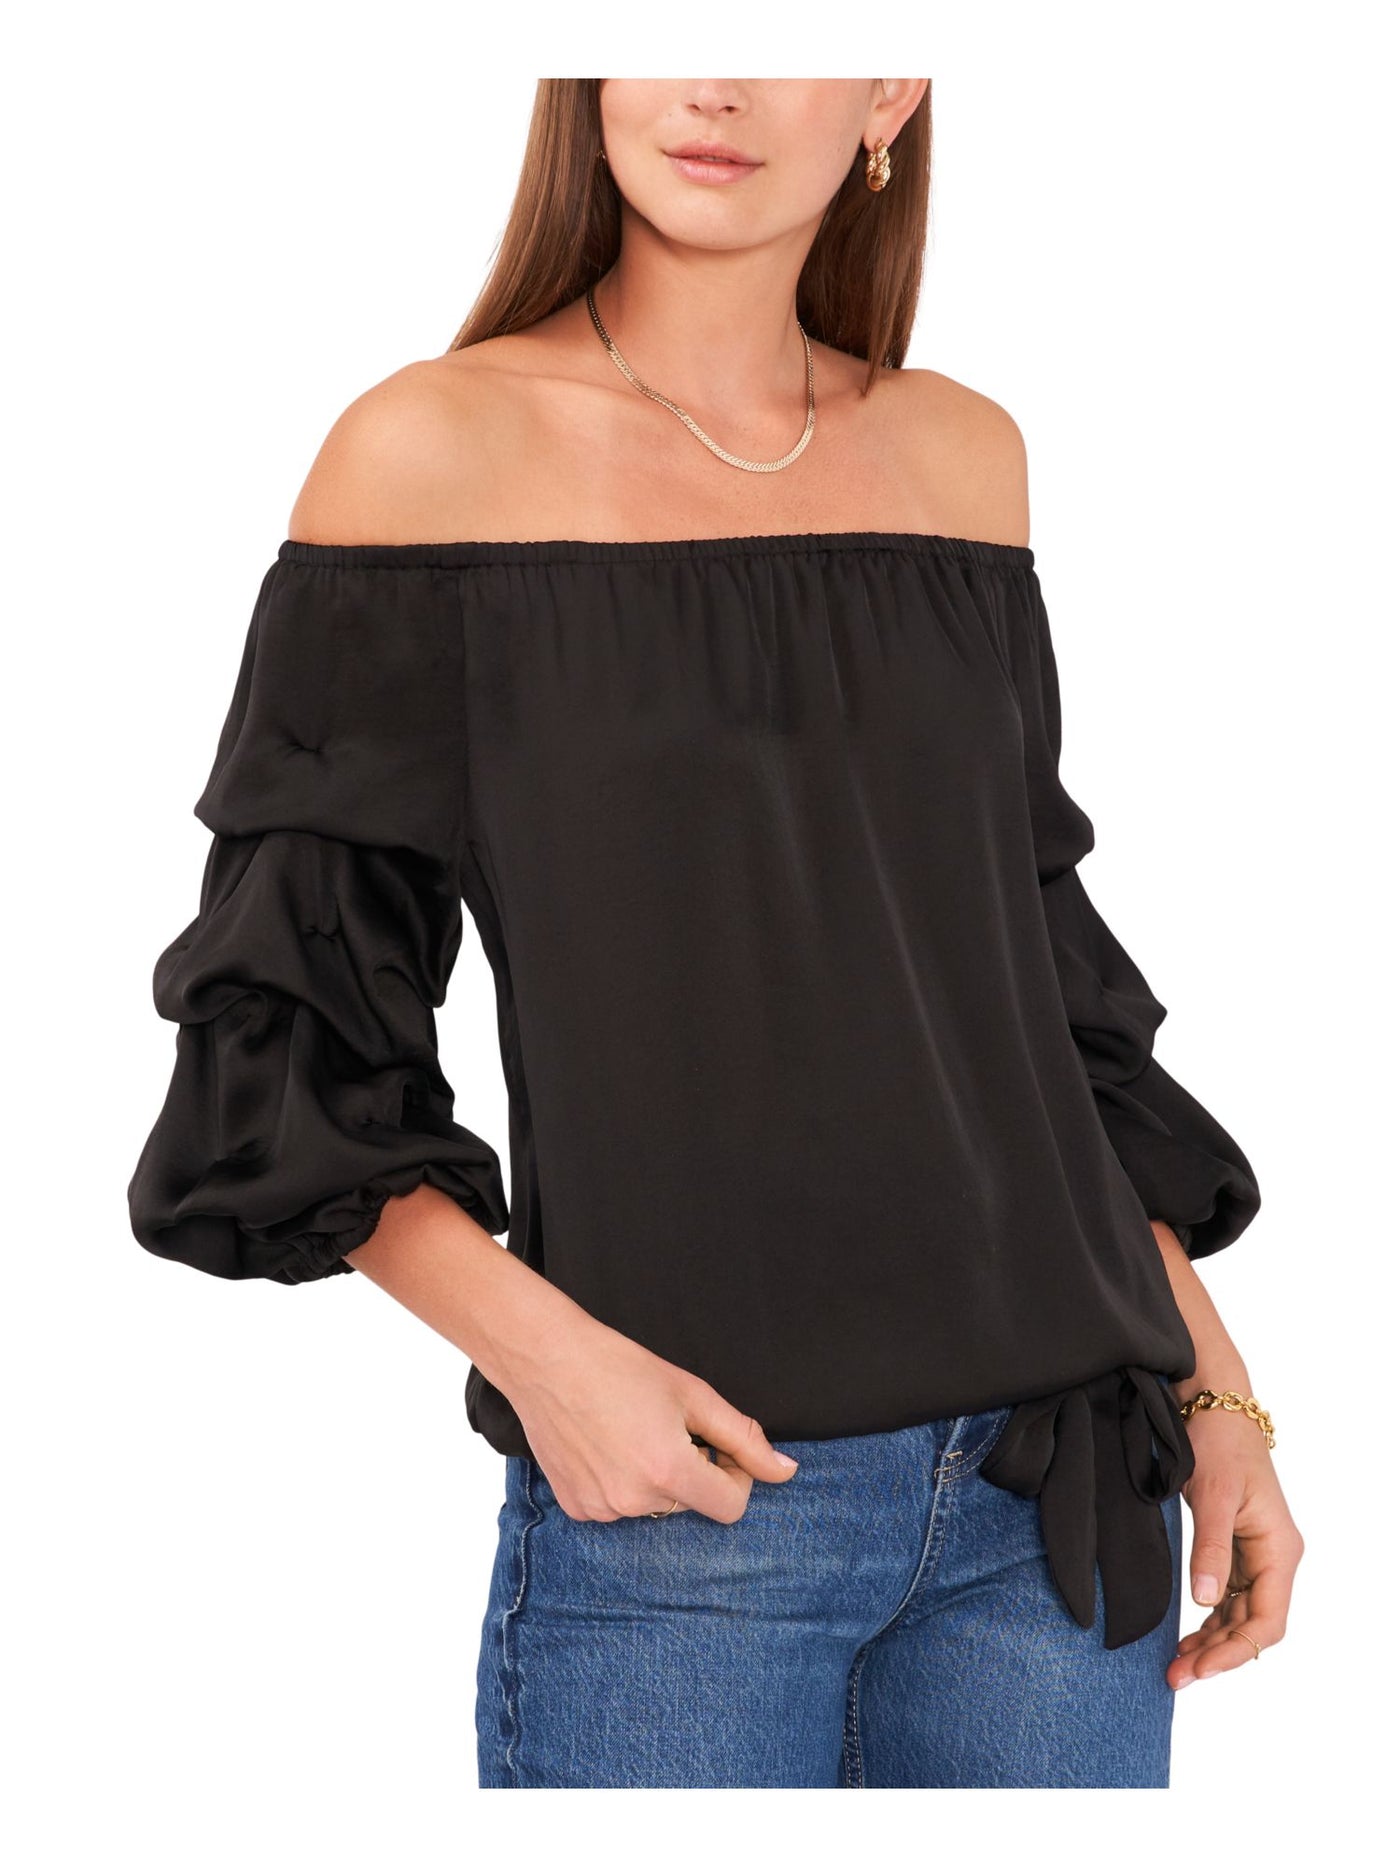 VINCE CAMUTO Womens Black Tie Ruched Lined Elasticized Sheer Balloon Sleeve Off Shoulder Cocktail Top L